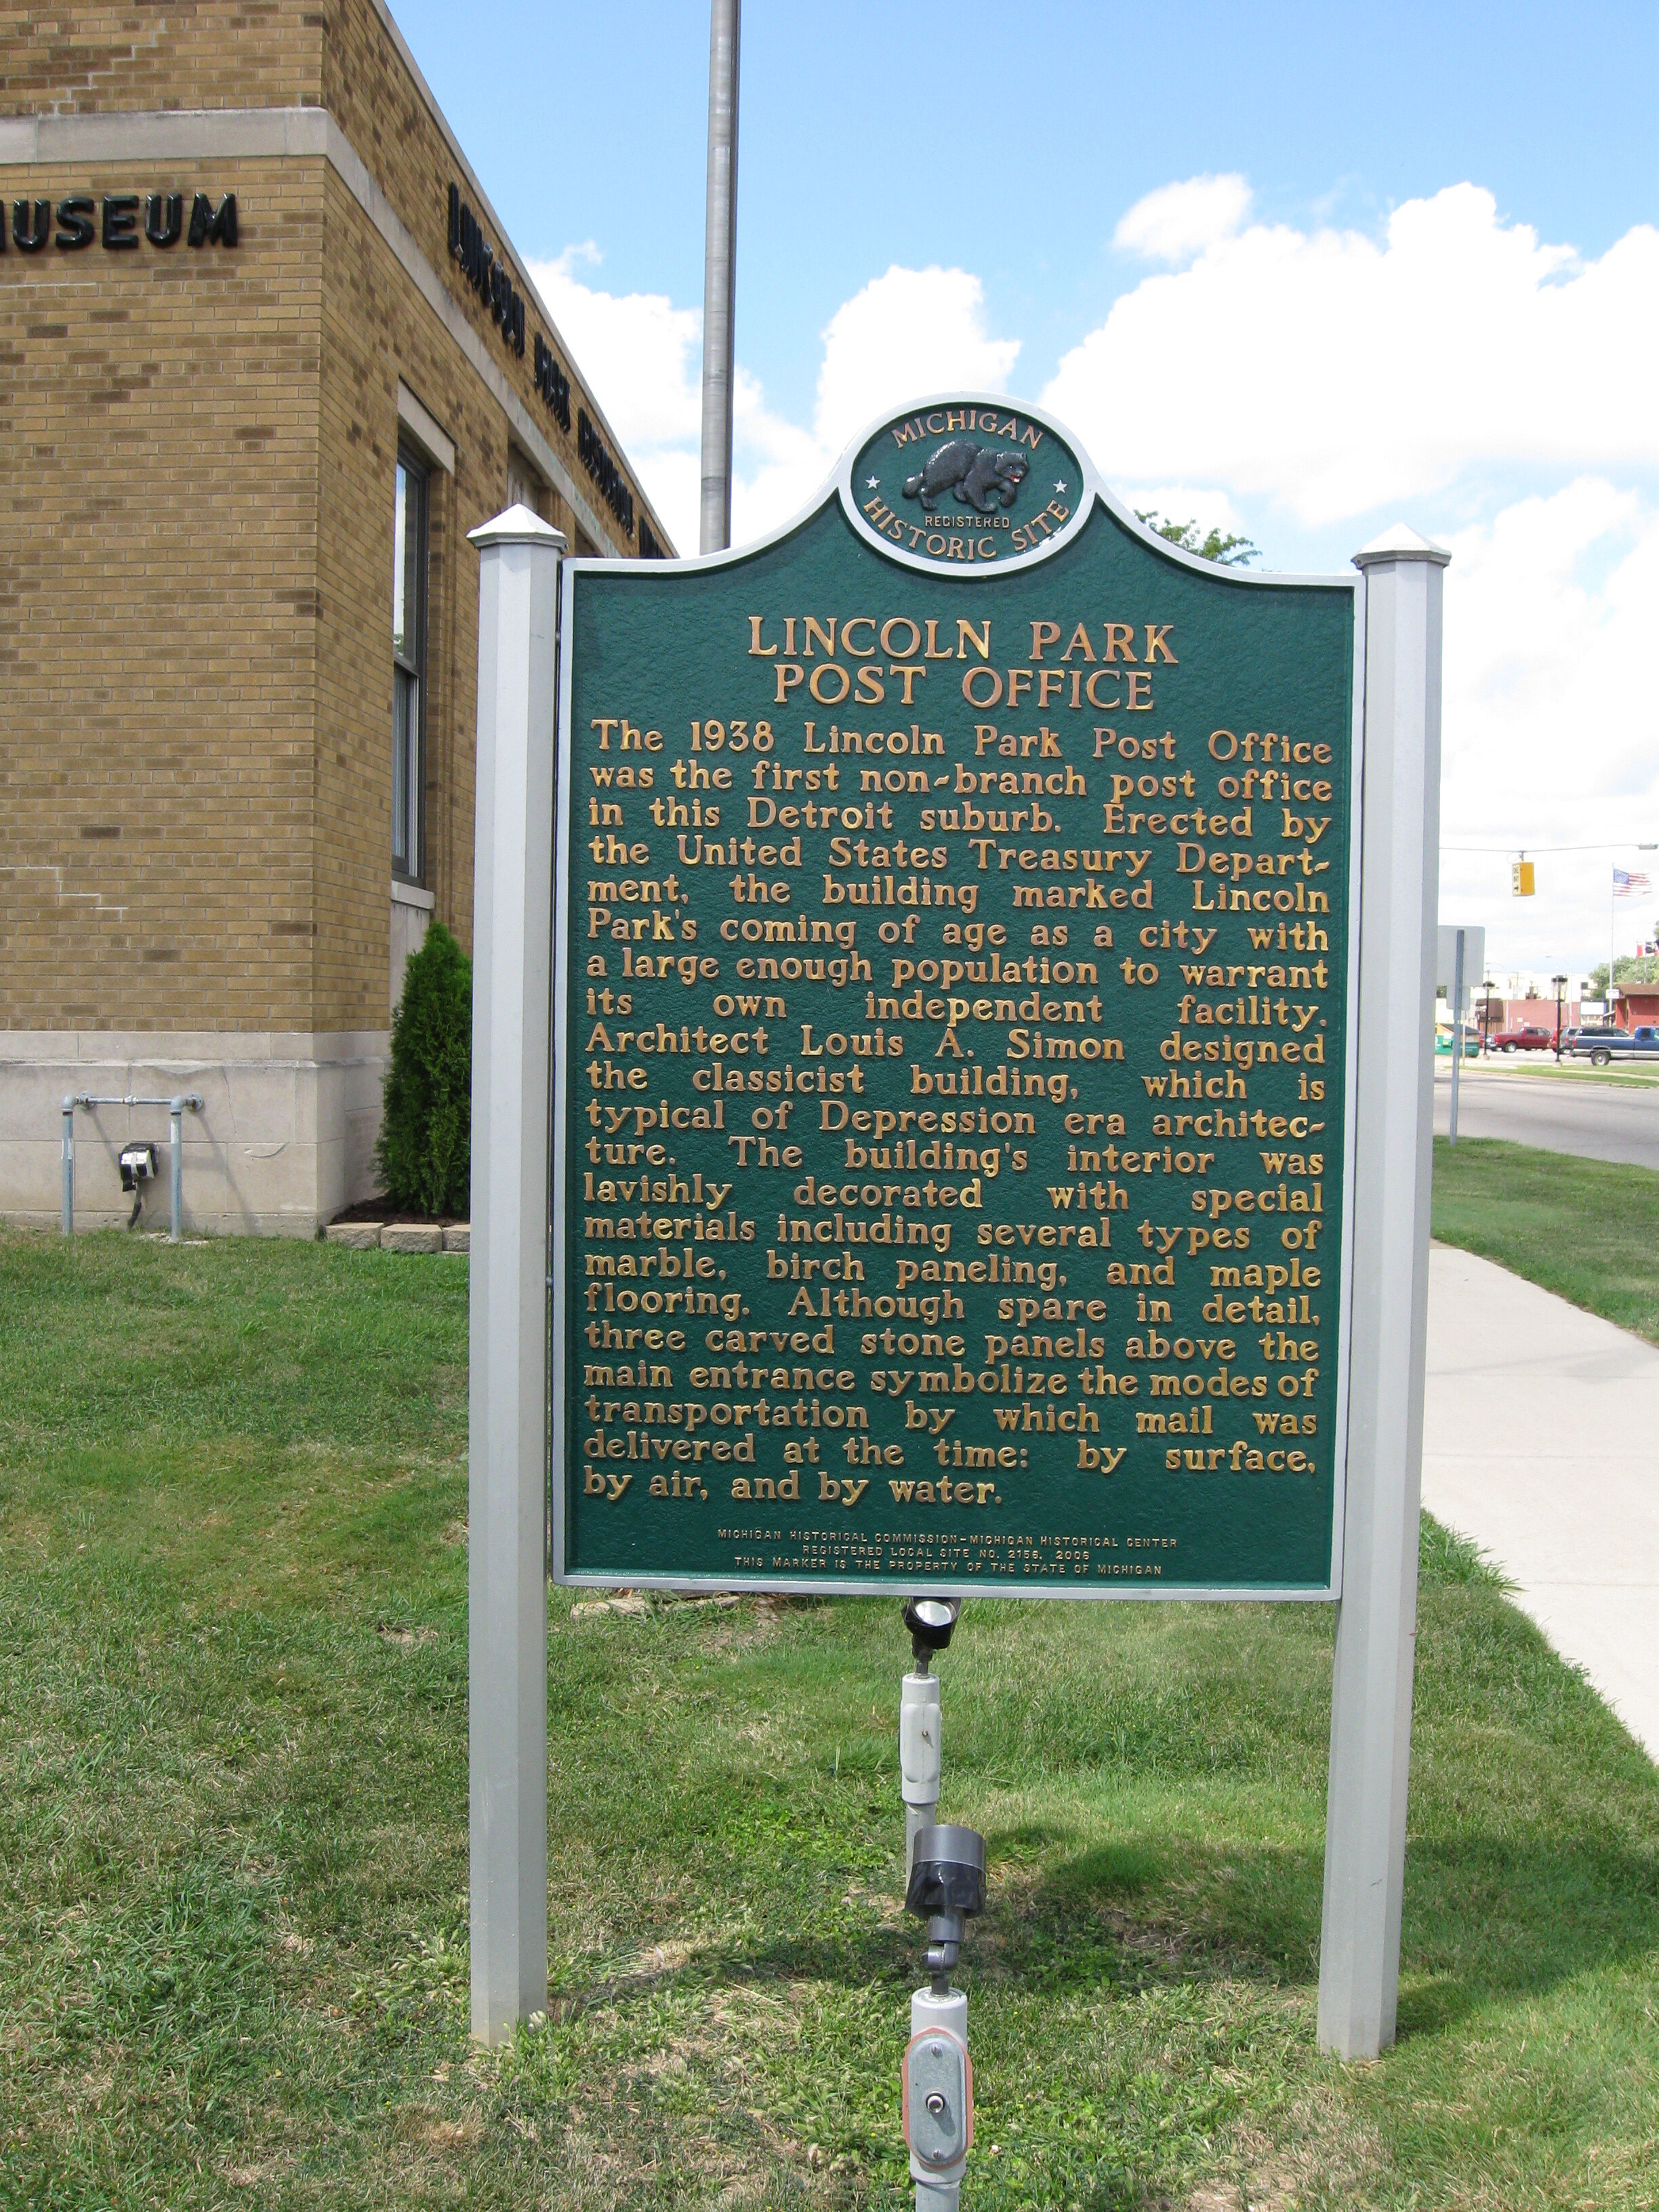 Michigan Historical Site Marker No. 2156 for the Lincoln Park Post Office building, shown after it was installed and dedicated in 2007